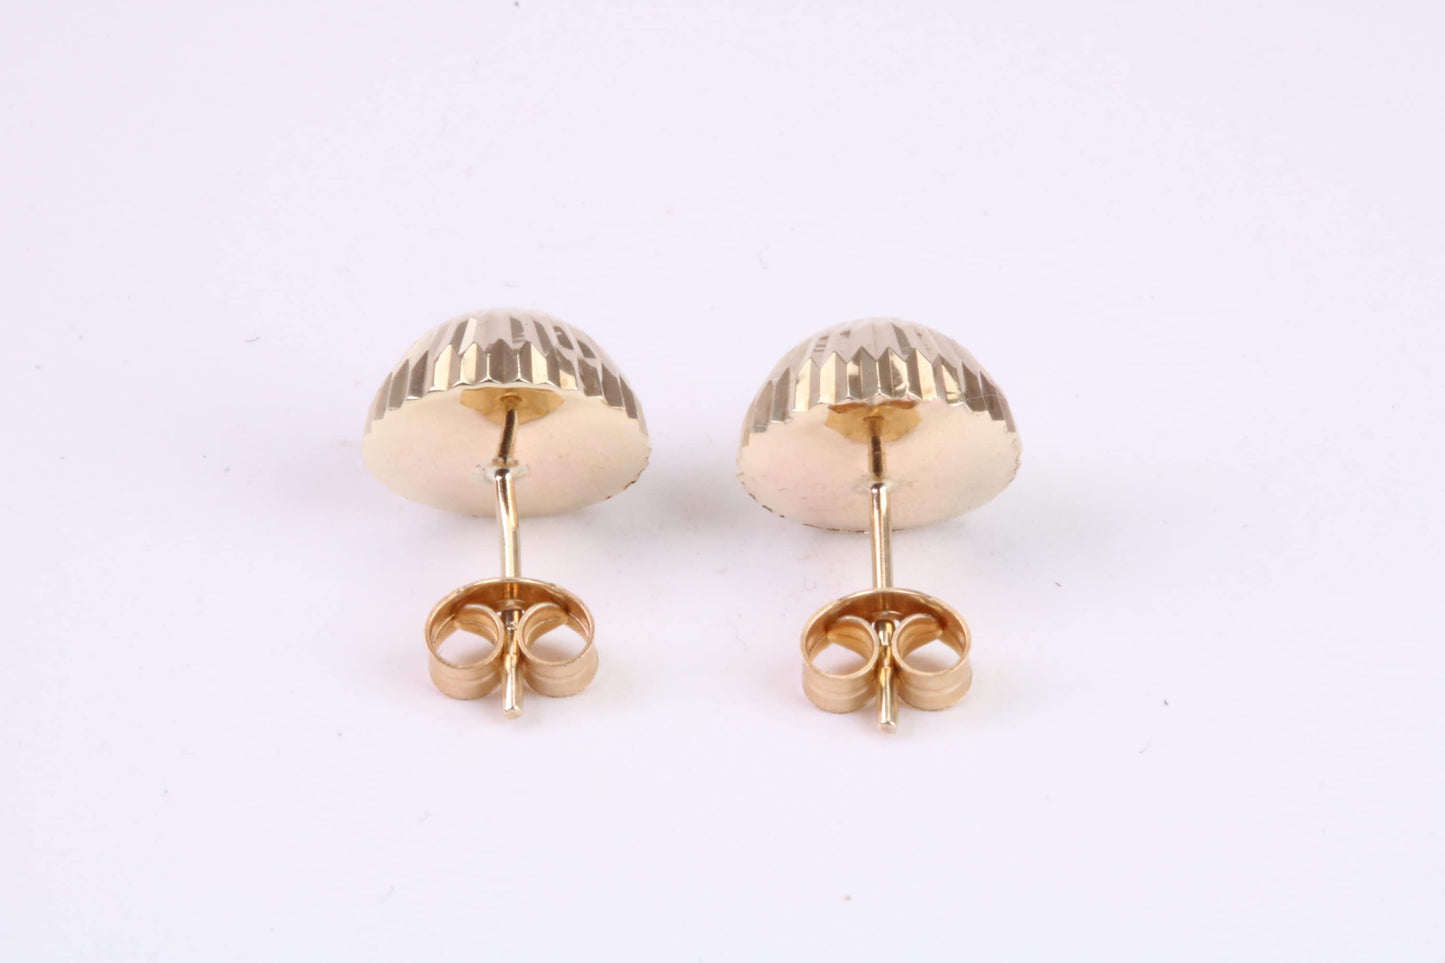 10 mm Round Diamond cut Domed Stud Earrings Made from Yellow Gold